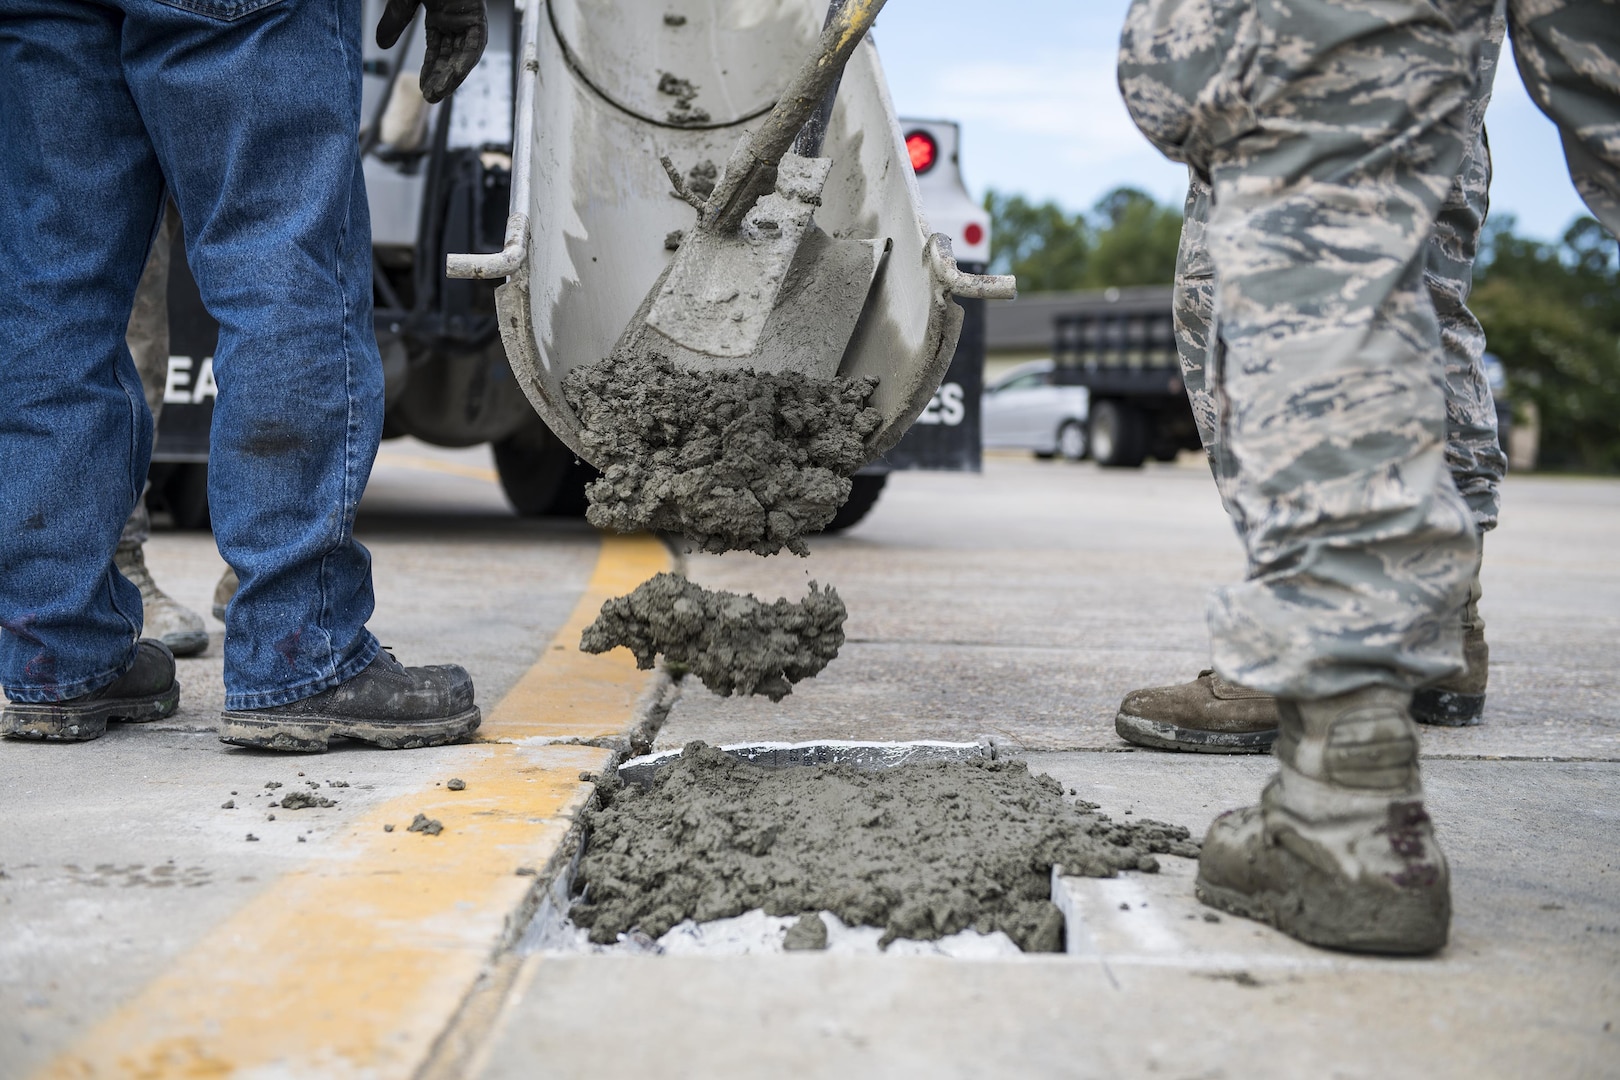 A student uses a leveling tool to finish a new patch of cement during a Pavements Maintenance, Inspection and Repair course, June 15, 2017, at Moody Air Force Base, Ga. Every year, training managers at the major command level across the Air Force pick multiple bases across the Air Force to host the course, and this year Moody hosted one from June 5-16. (U.S. Air Force photo by Senior Airman Janiqua P. Robinson)